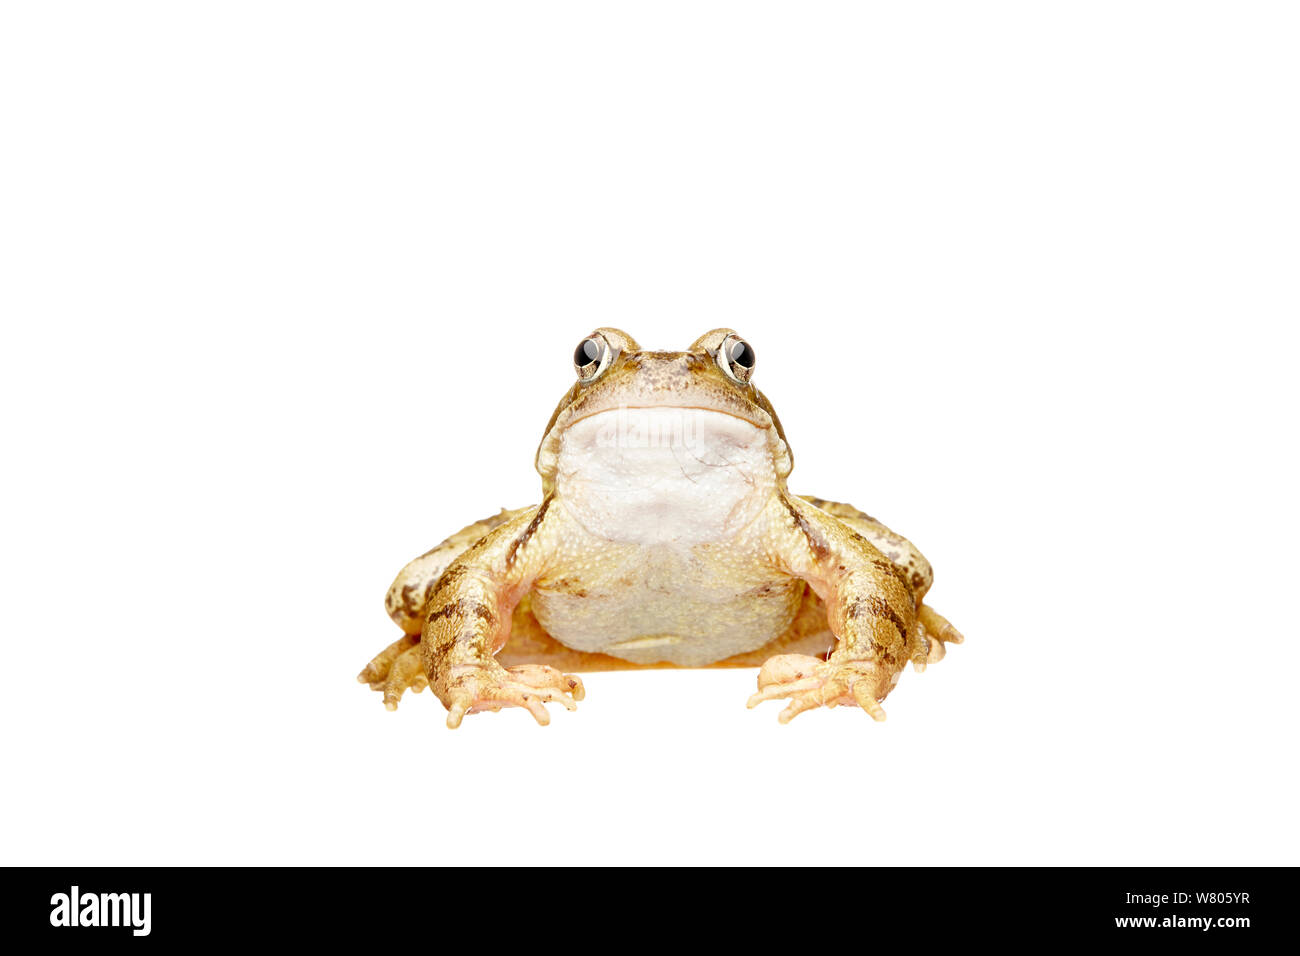 Grenouille rousse (Rana temporaria) portrait, Barnt Green, Worcestershire, Angleterre, Royaume-Uni, octobre. Banque D'Images